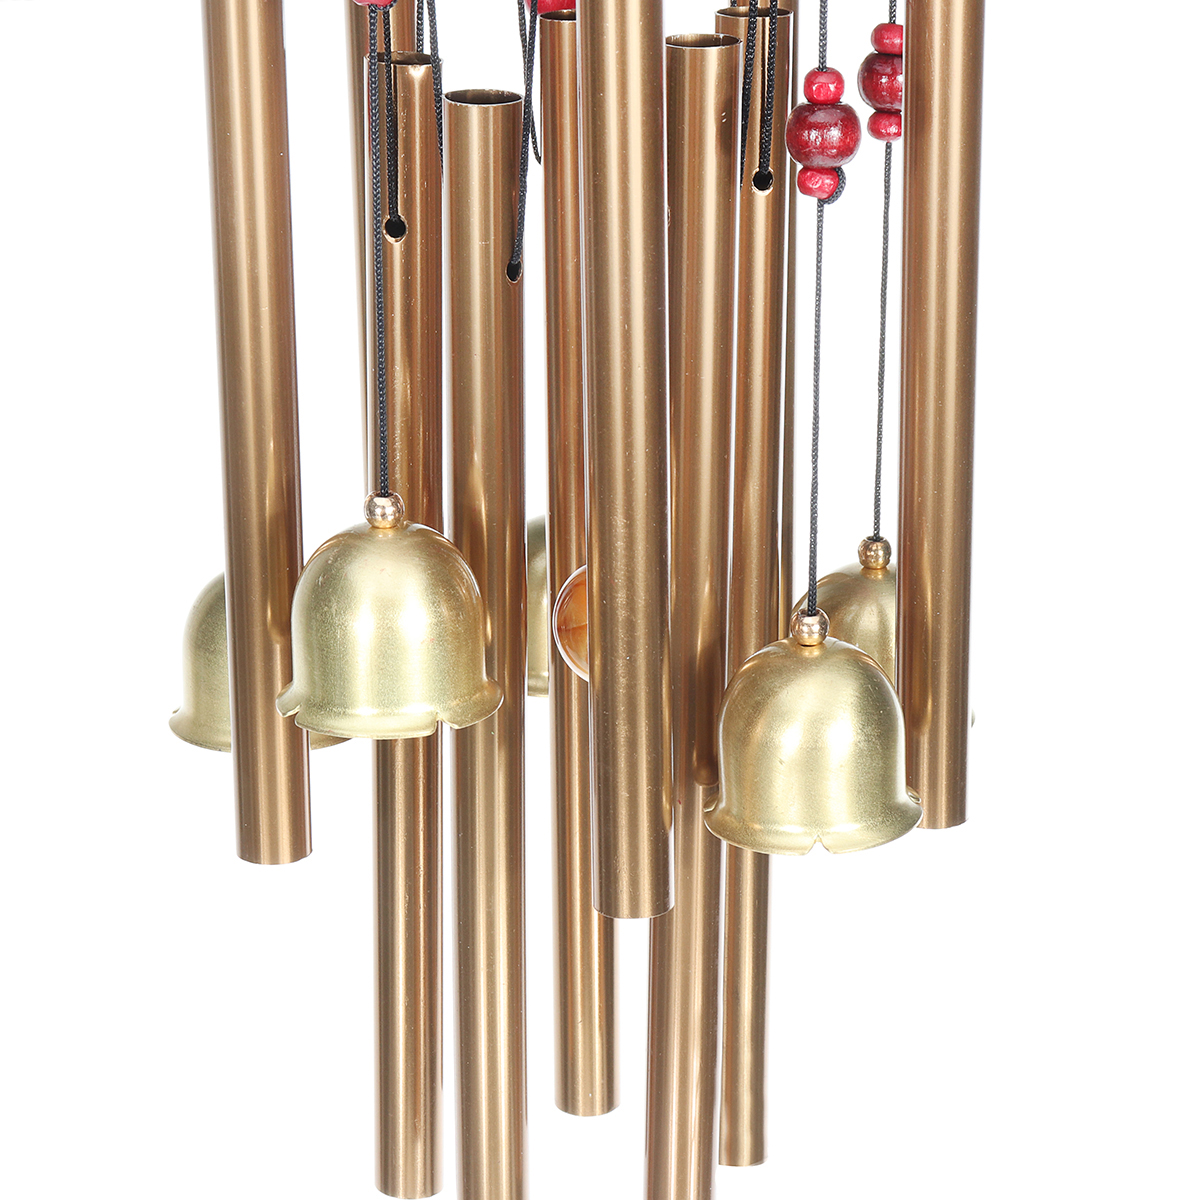 Wind-Chimes-Large-Tone-Resonant-Bell-10-Tubes-Chapel-Church-Garden-Decor-33quot-1694339-8